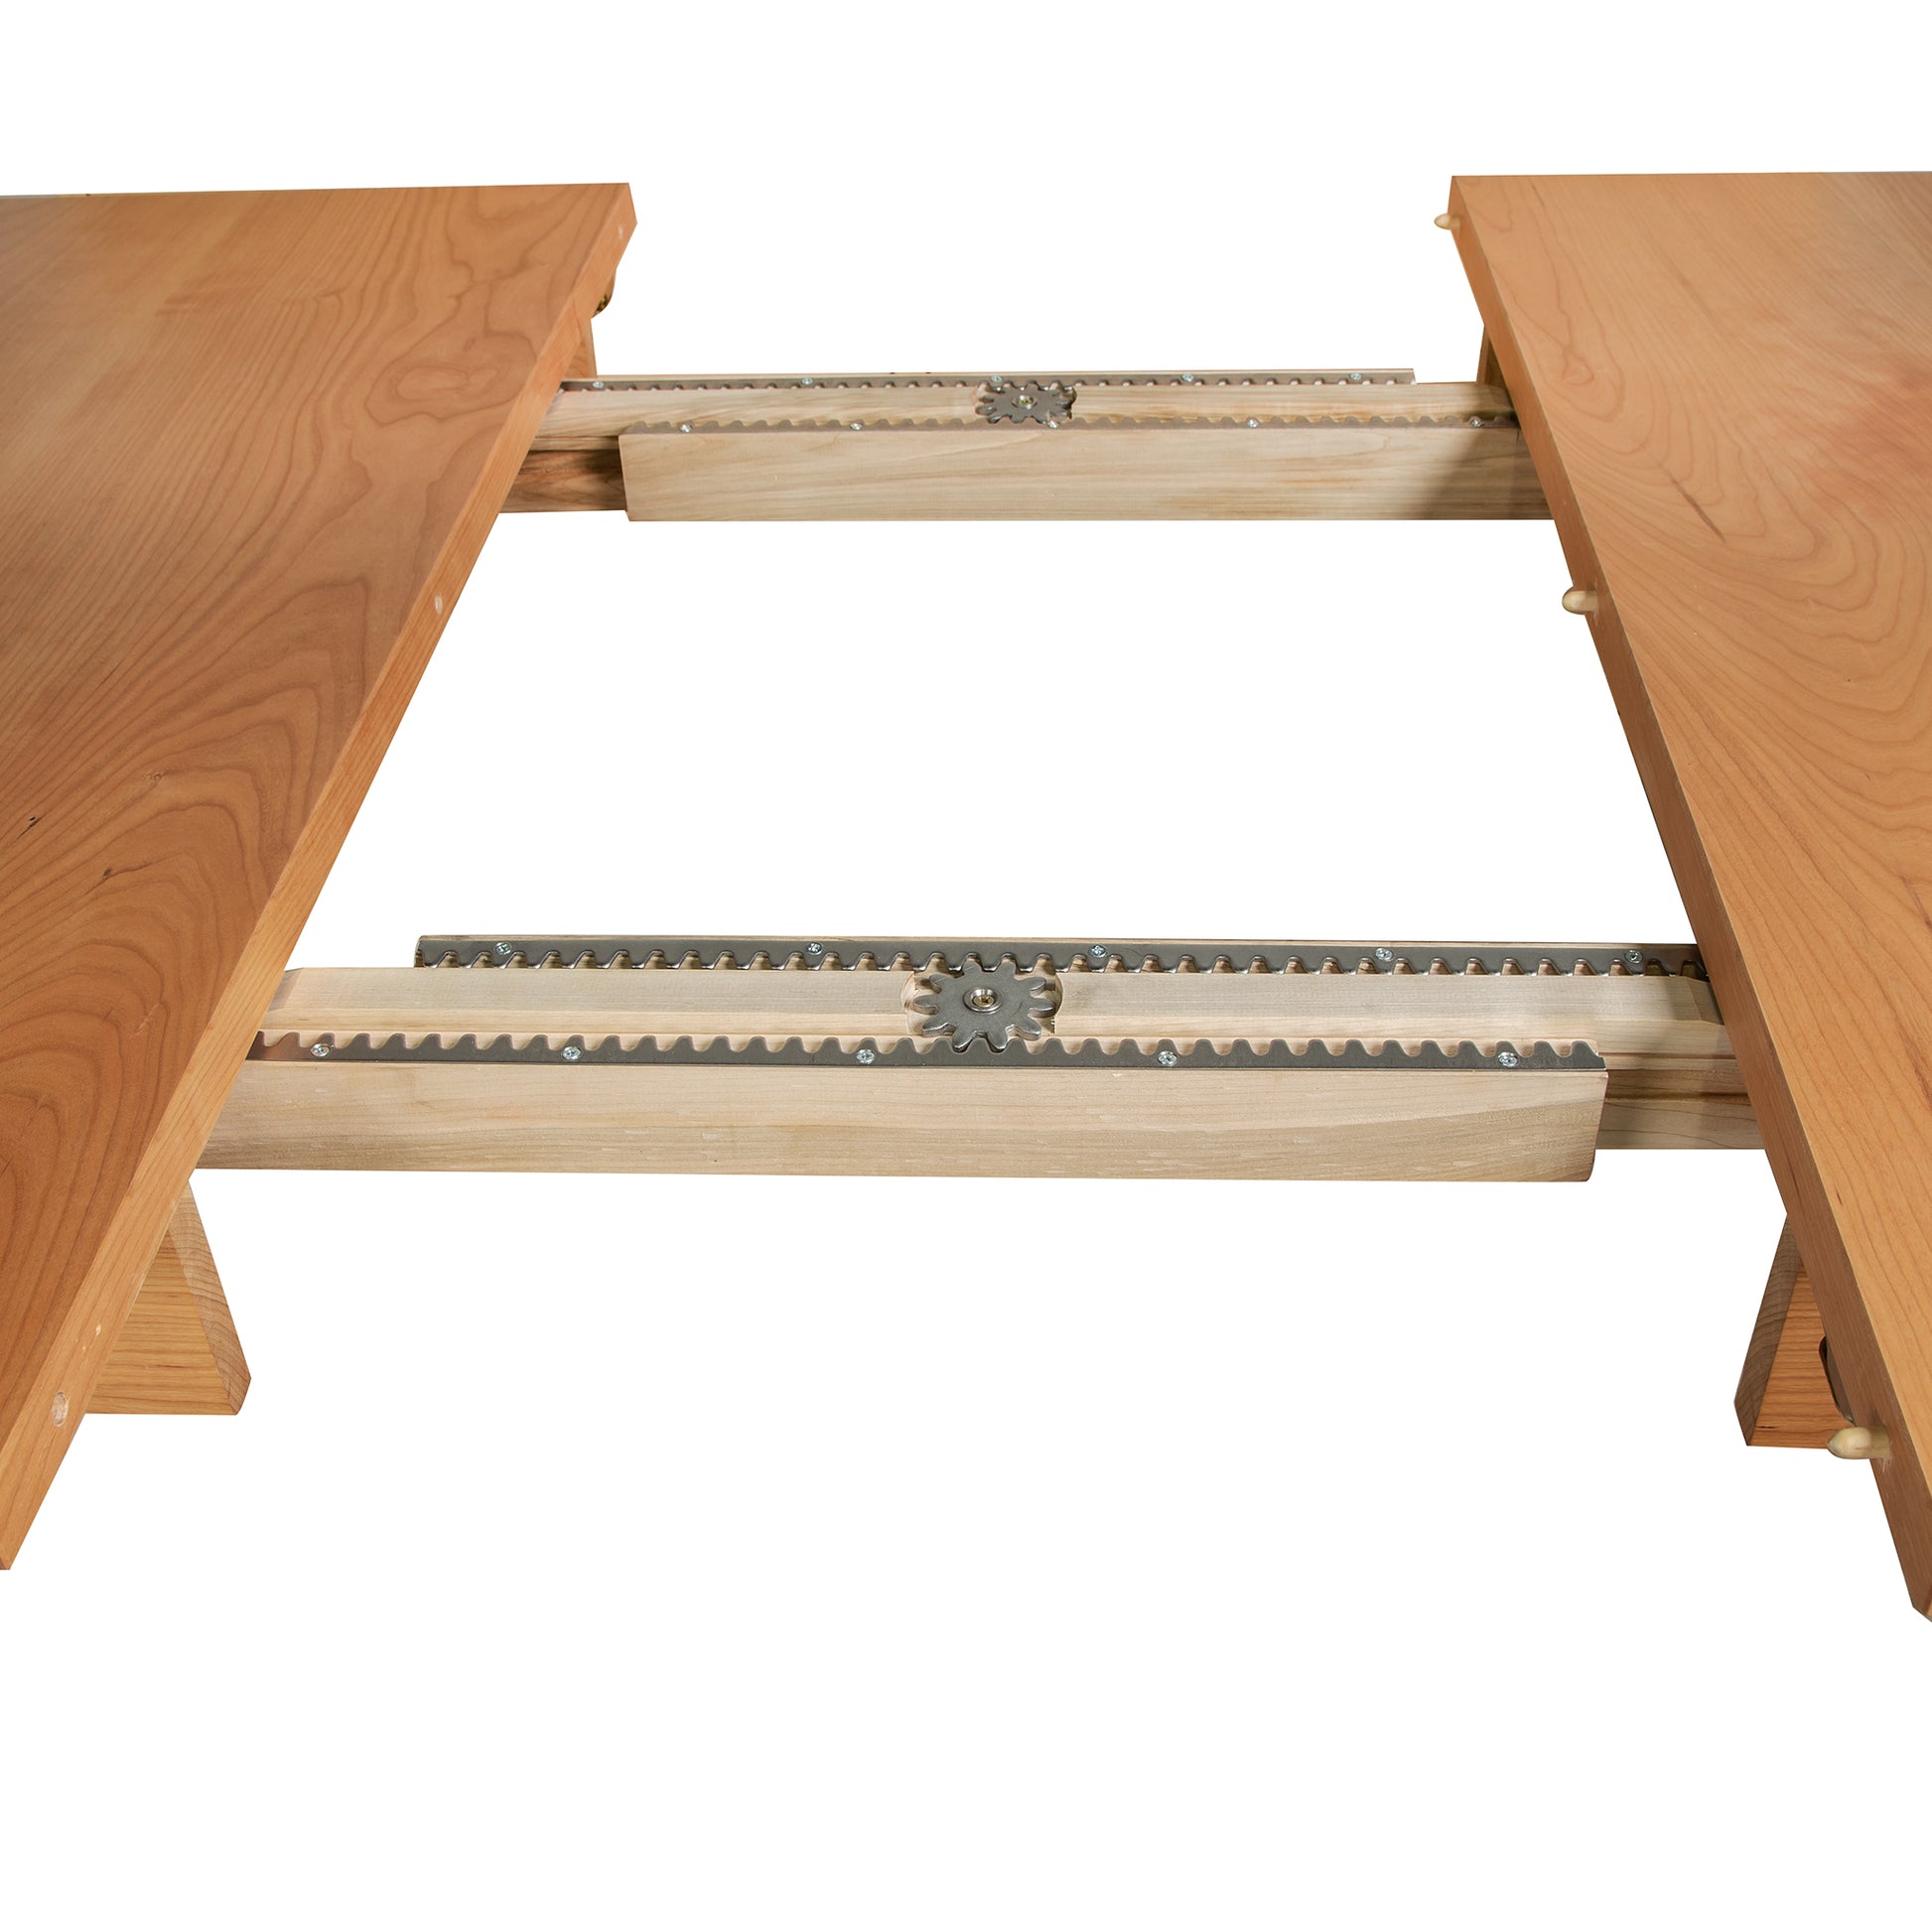 Handcrafted Vermont Shaker Rectangular Extension Dining Table - Clearance with an extendable section and visible metal gears for the mechanism by Maple Corner Woodworks.